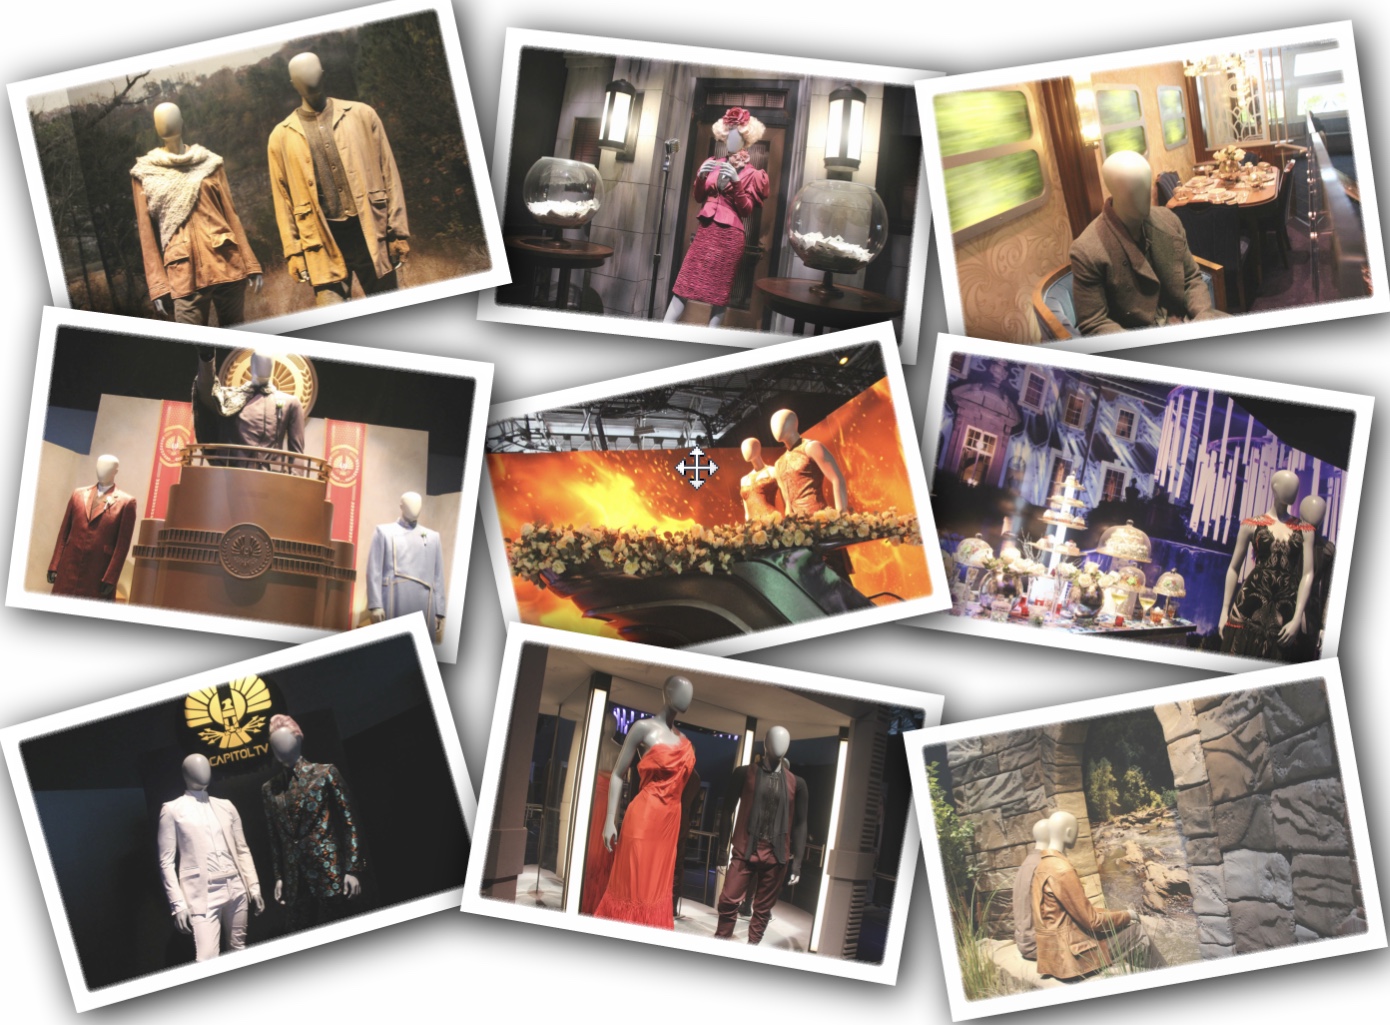 Hunger Games Exhibition image